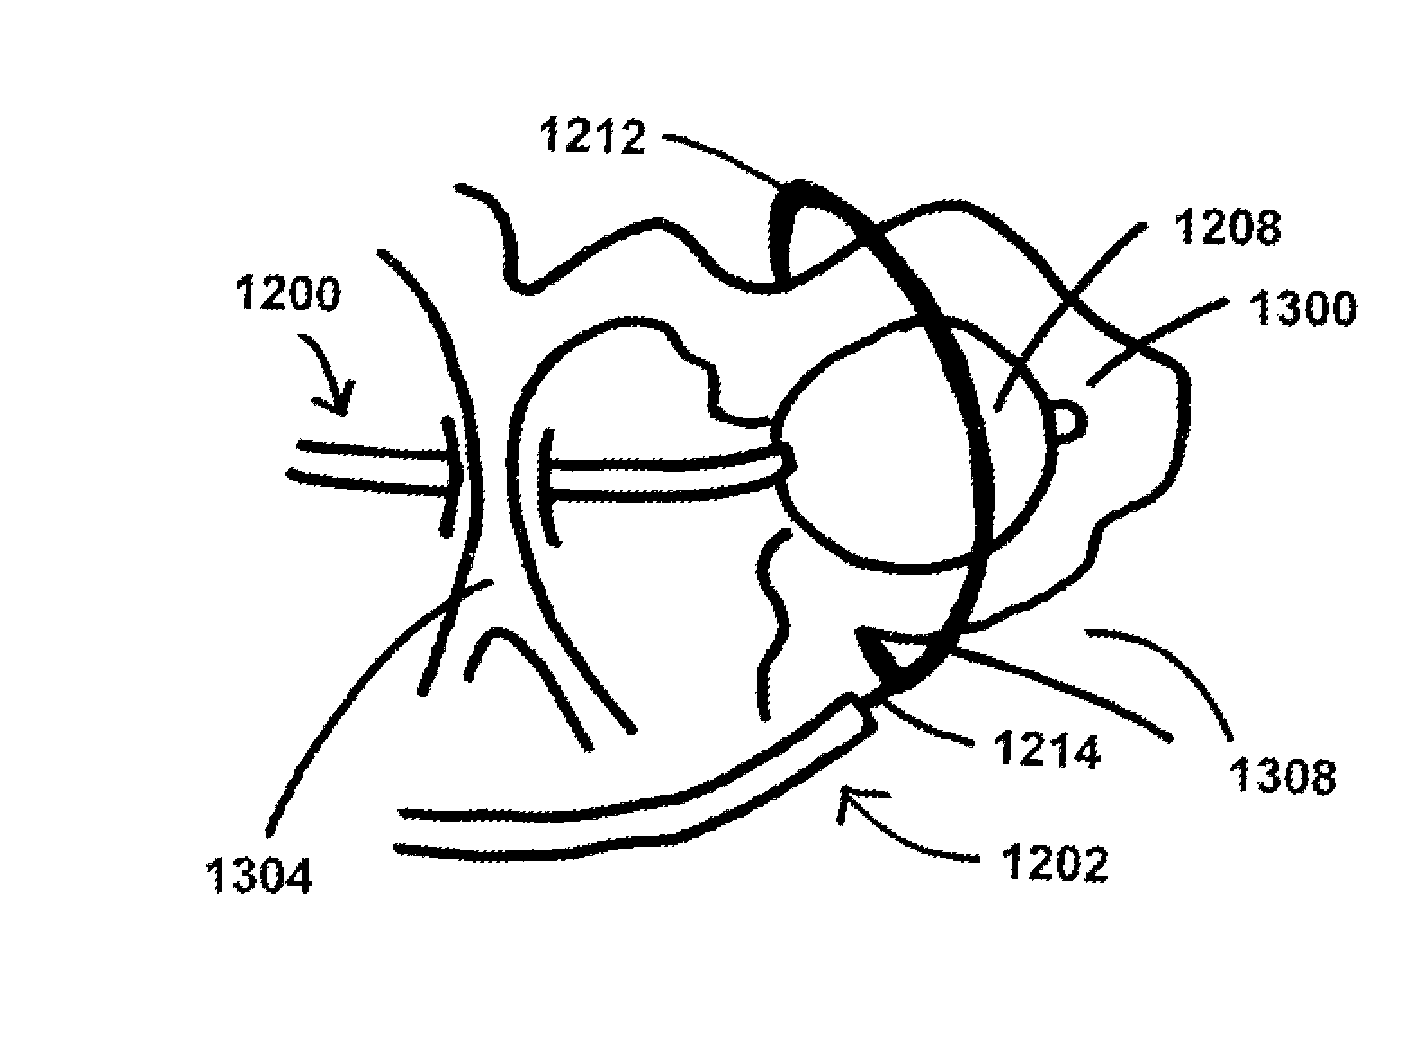 Devices, systems, and methods for percutaneous trans-septal left atrial appendage occlusion